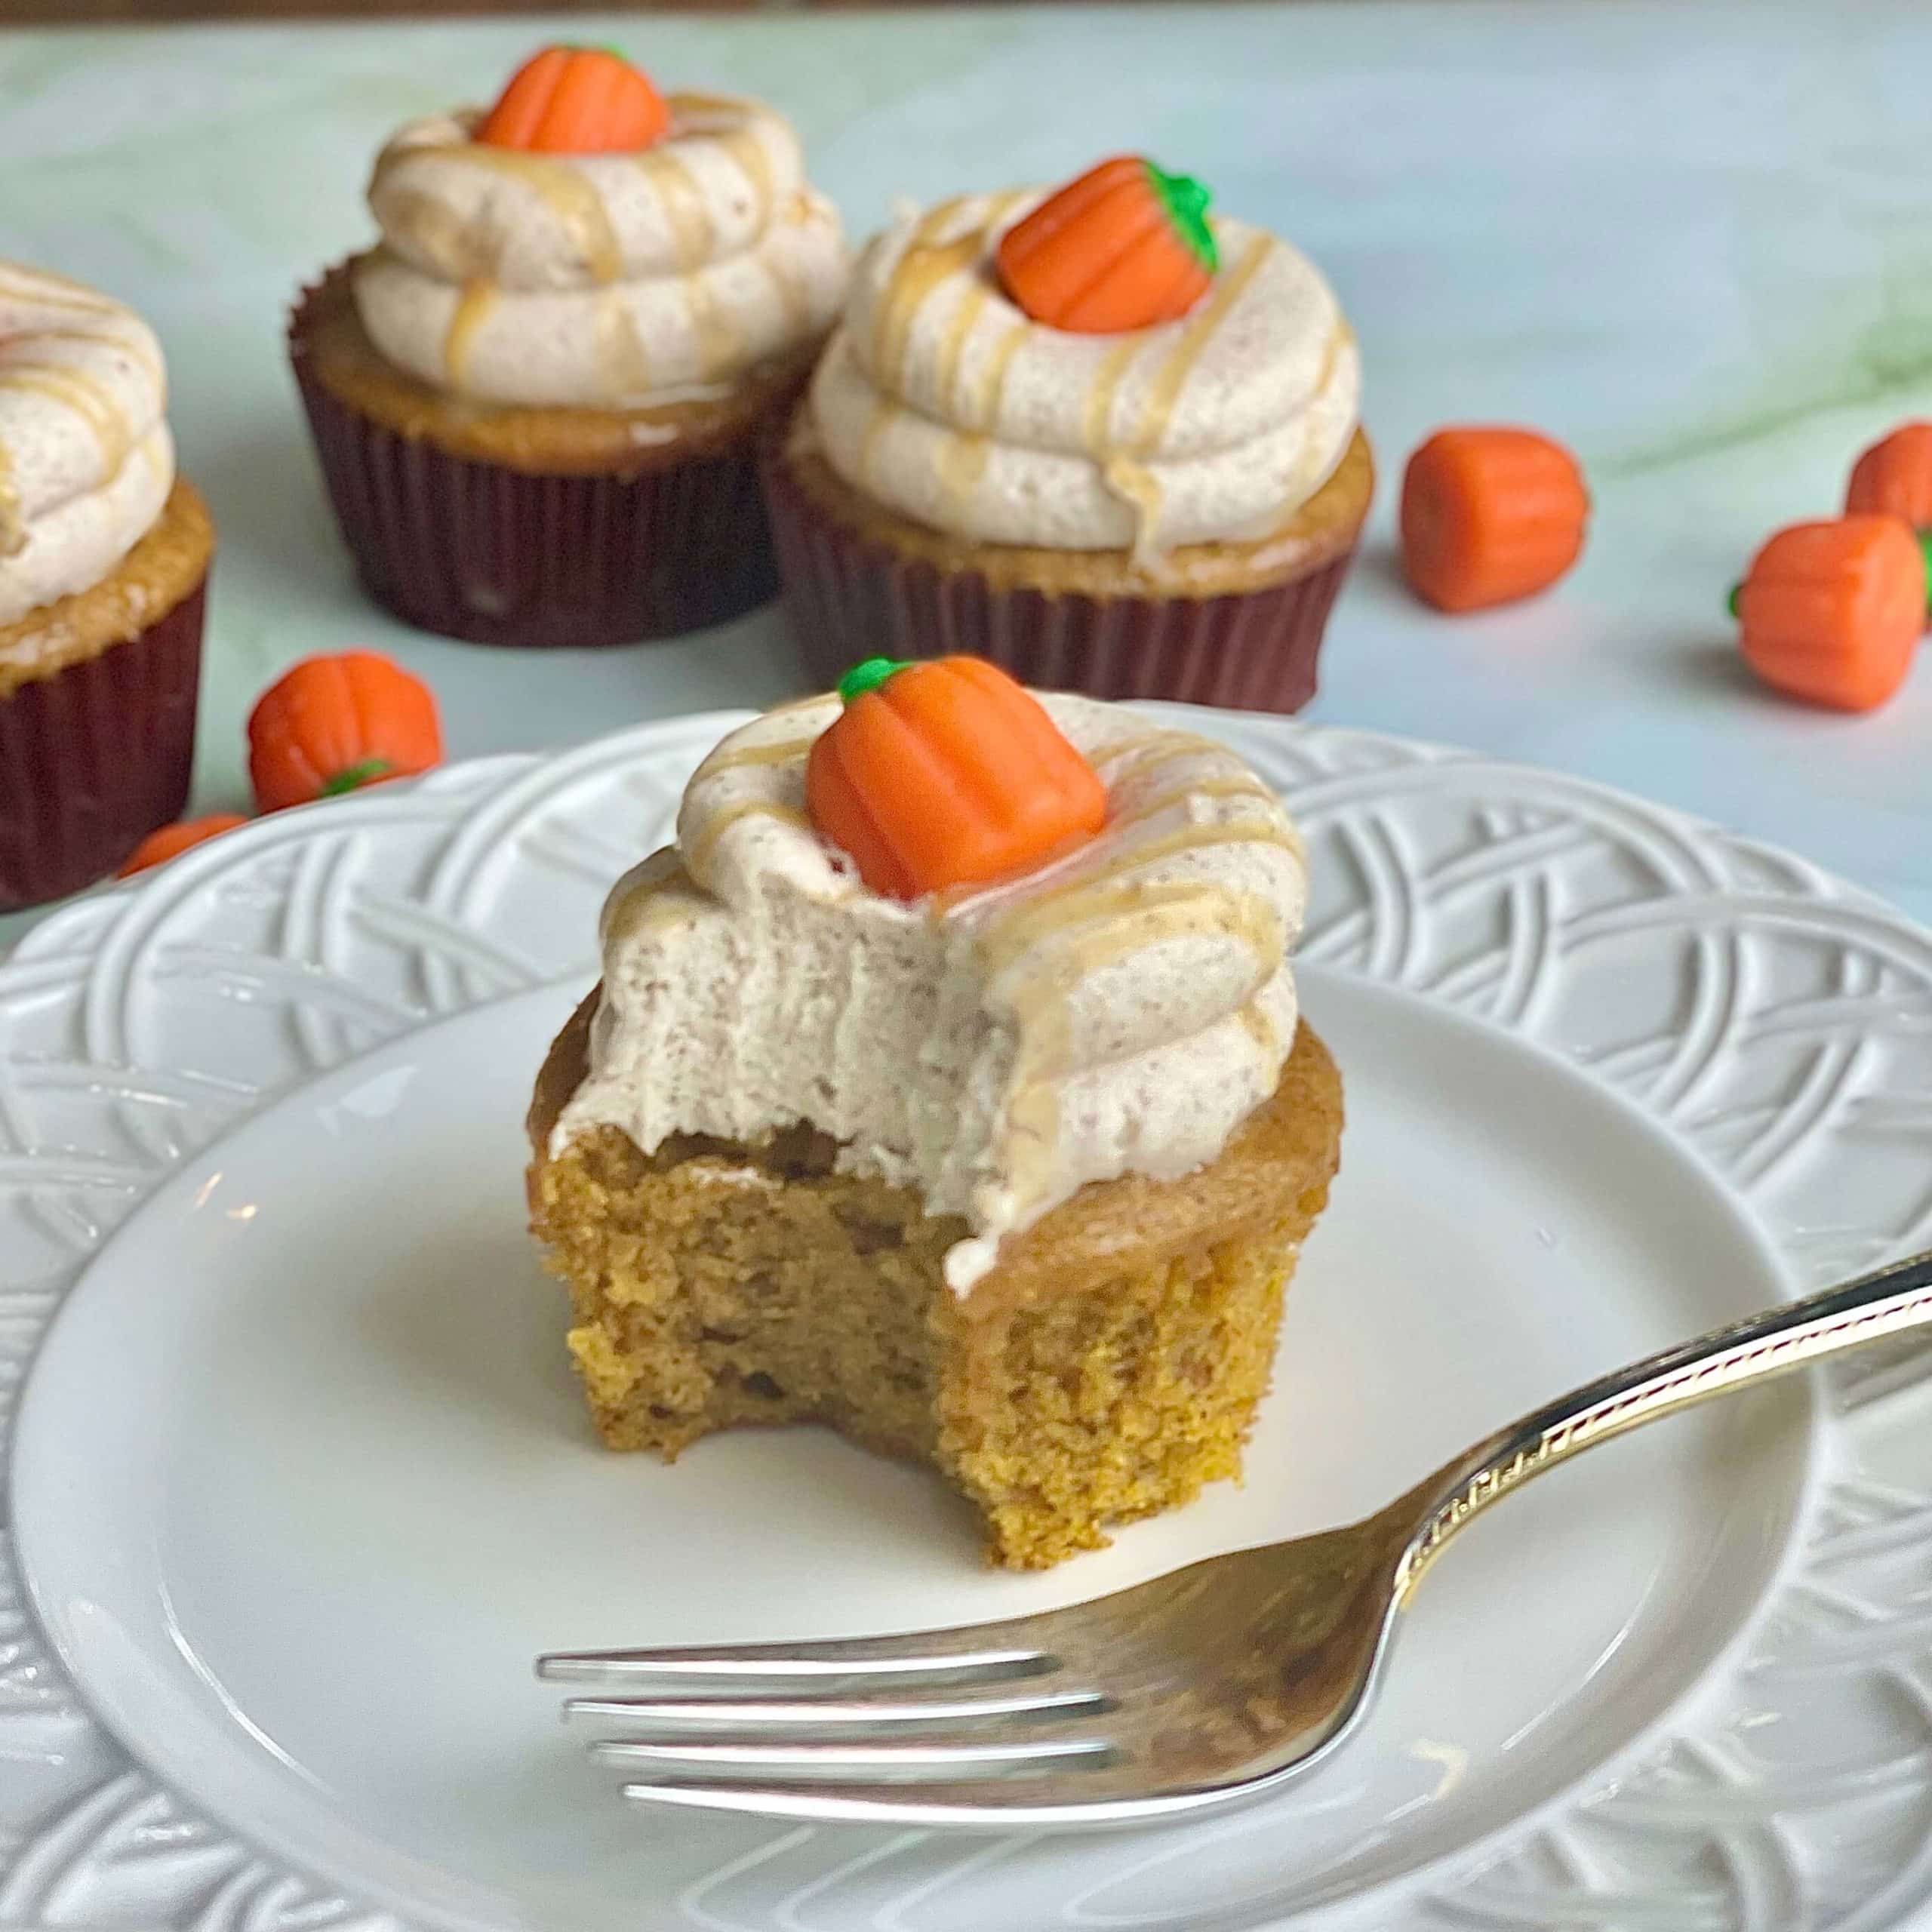 https://amycakesbakes.com/wp-content/uploads/2021/10/Soft-and-Moist-Pumpkin-Spice-Cupcake-with-Cinnamon-Buttercream-scaled.jpg